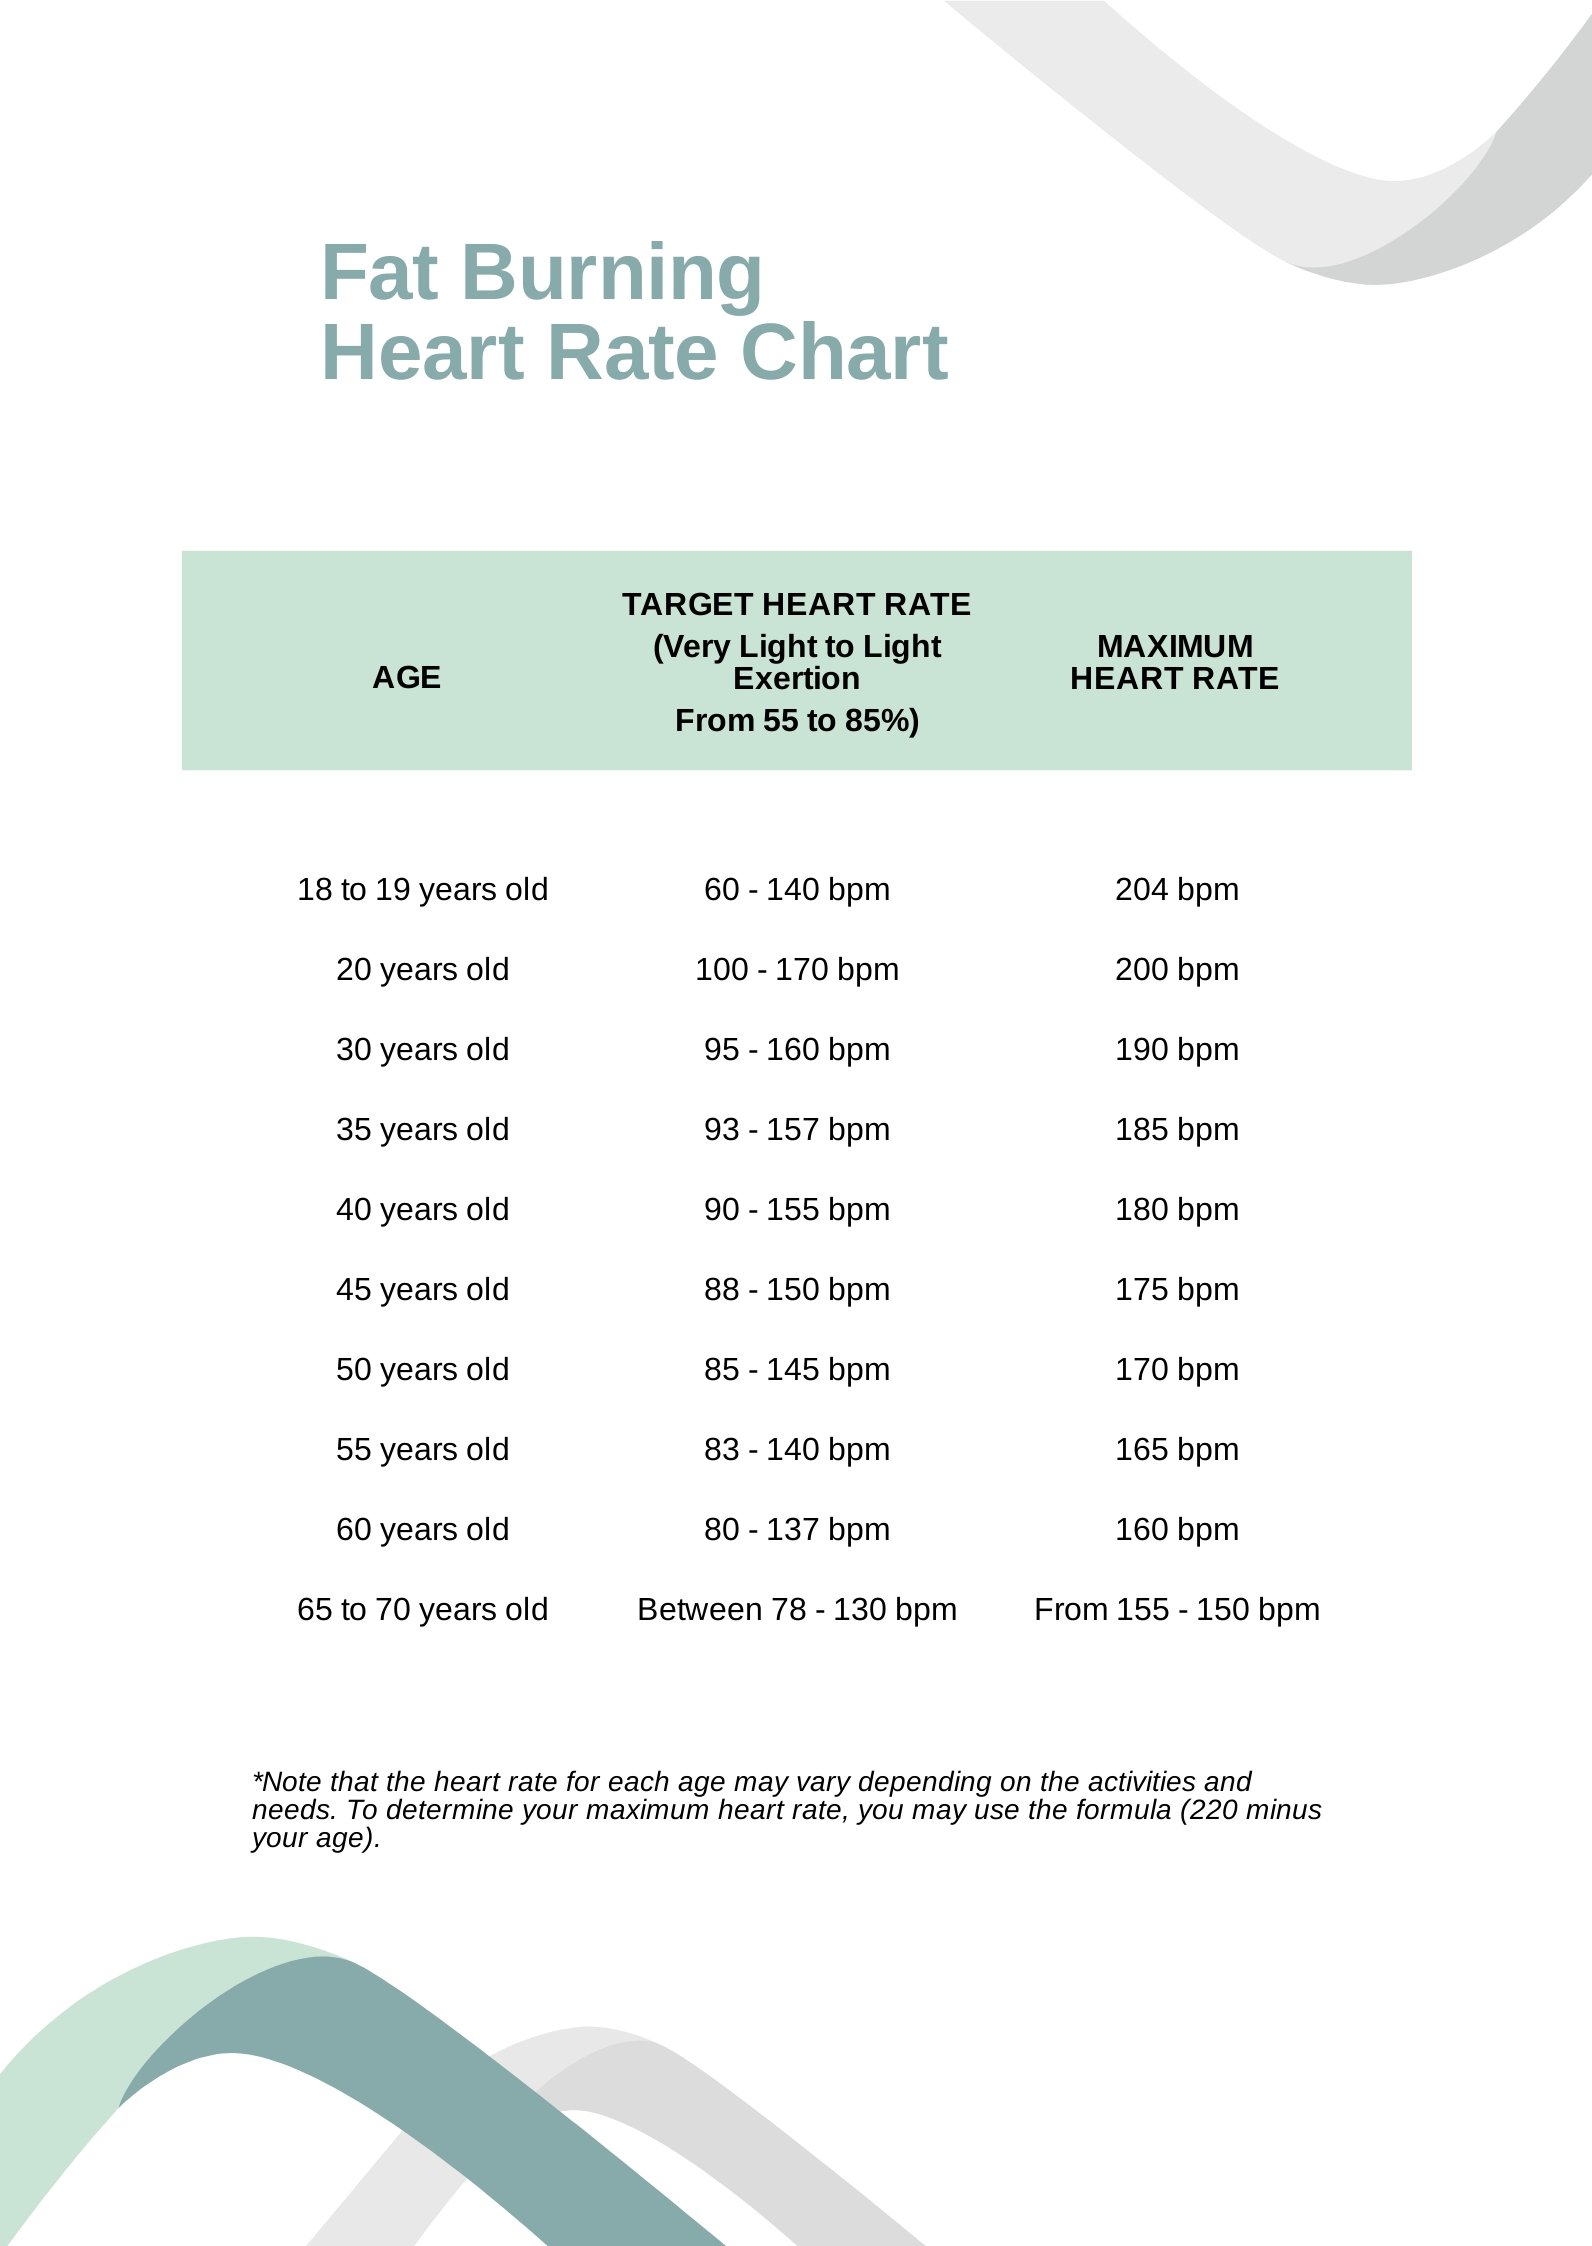 Weight Loss Heart Rate Chart